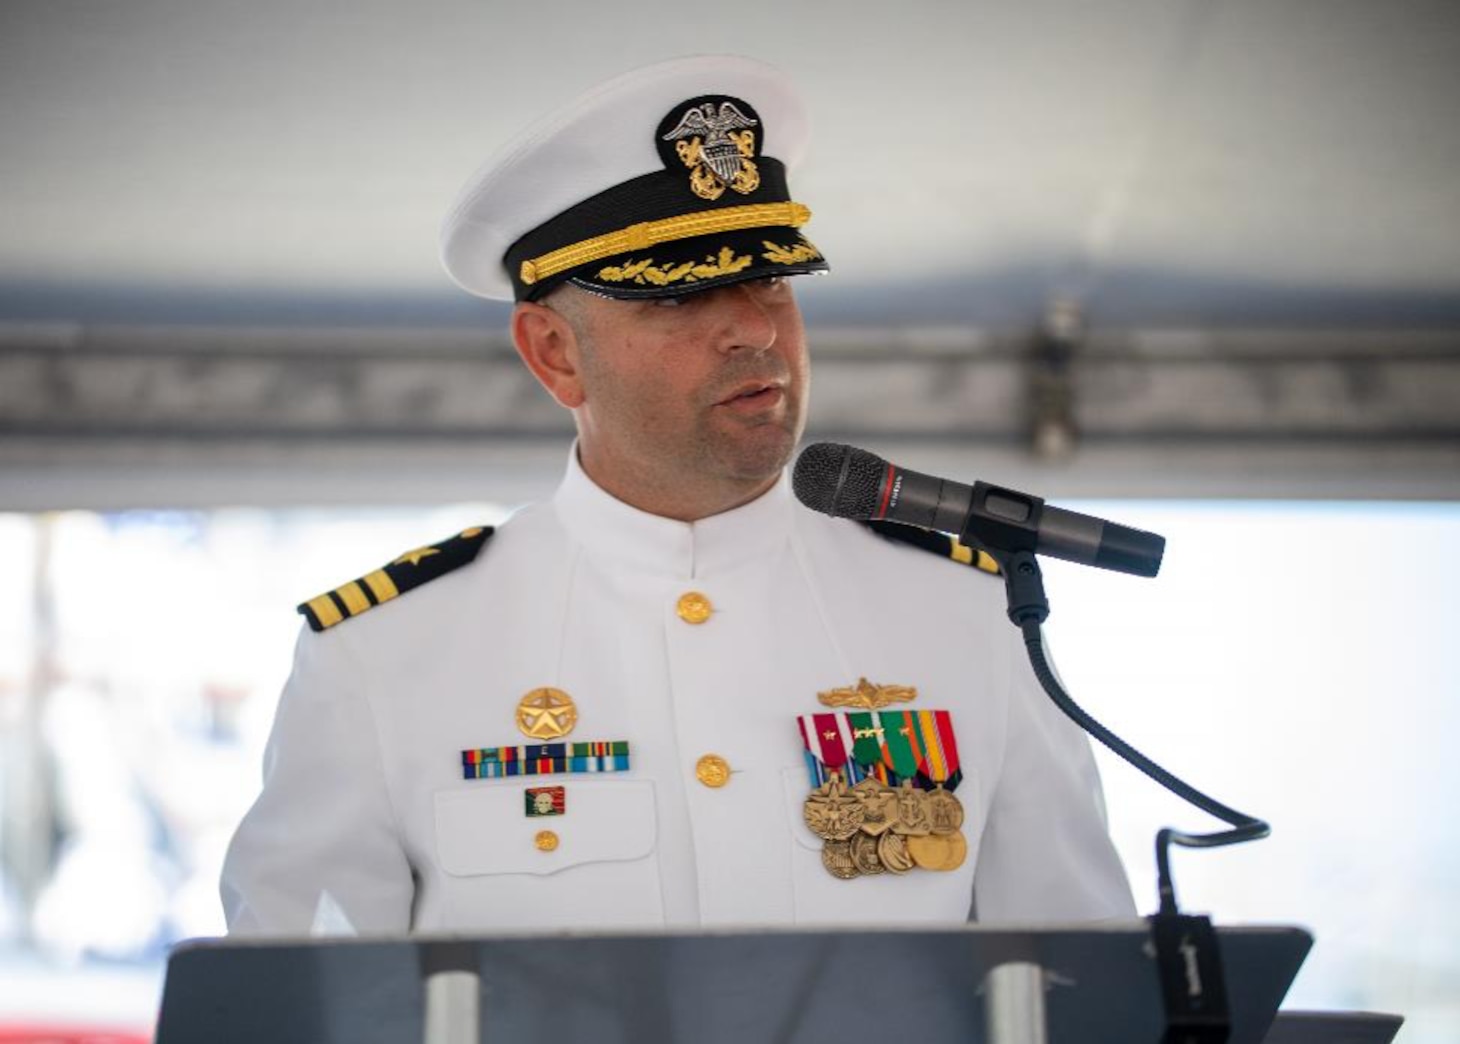 NORFOLK, Va. (Sept. 22, 2022) Cmdr. Gregory J. Piorun, Jr., commanding officer of the Ticonderoga-class, guided-missile cruiser USS Anzio (CG 68), speaks during the ship’s decommissioning ceremony onboard Naval Station Norfolk, Sept. 22, 2022. Anzio was decommissioned after 30 years of service.  (U.S. Navy photo by Mass Communication Specialist 3rd Class Bradley Rickard)